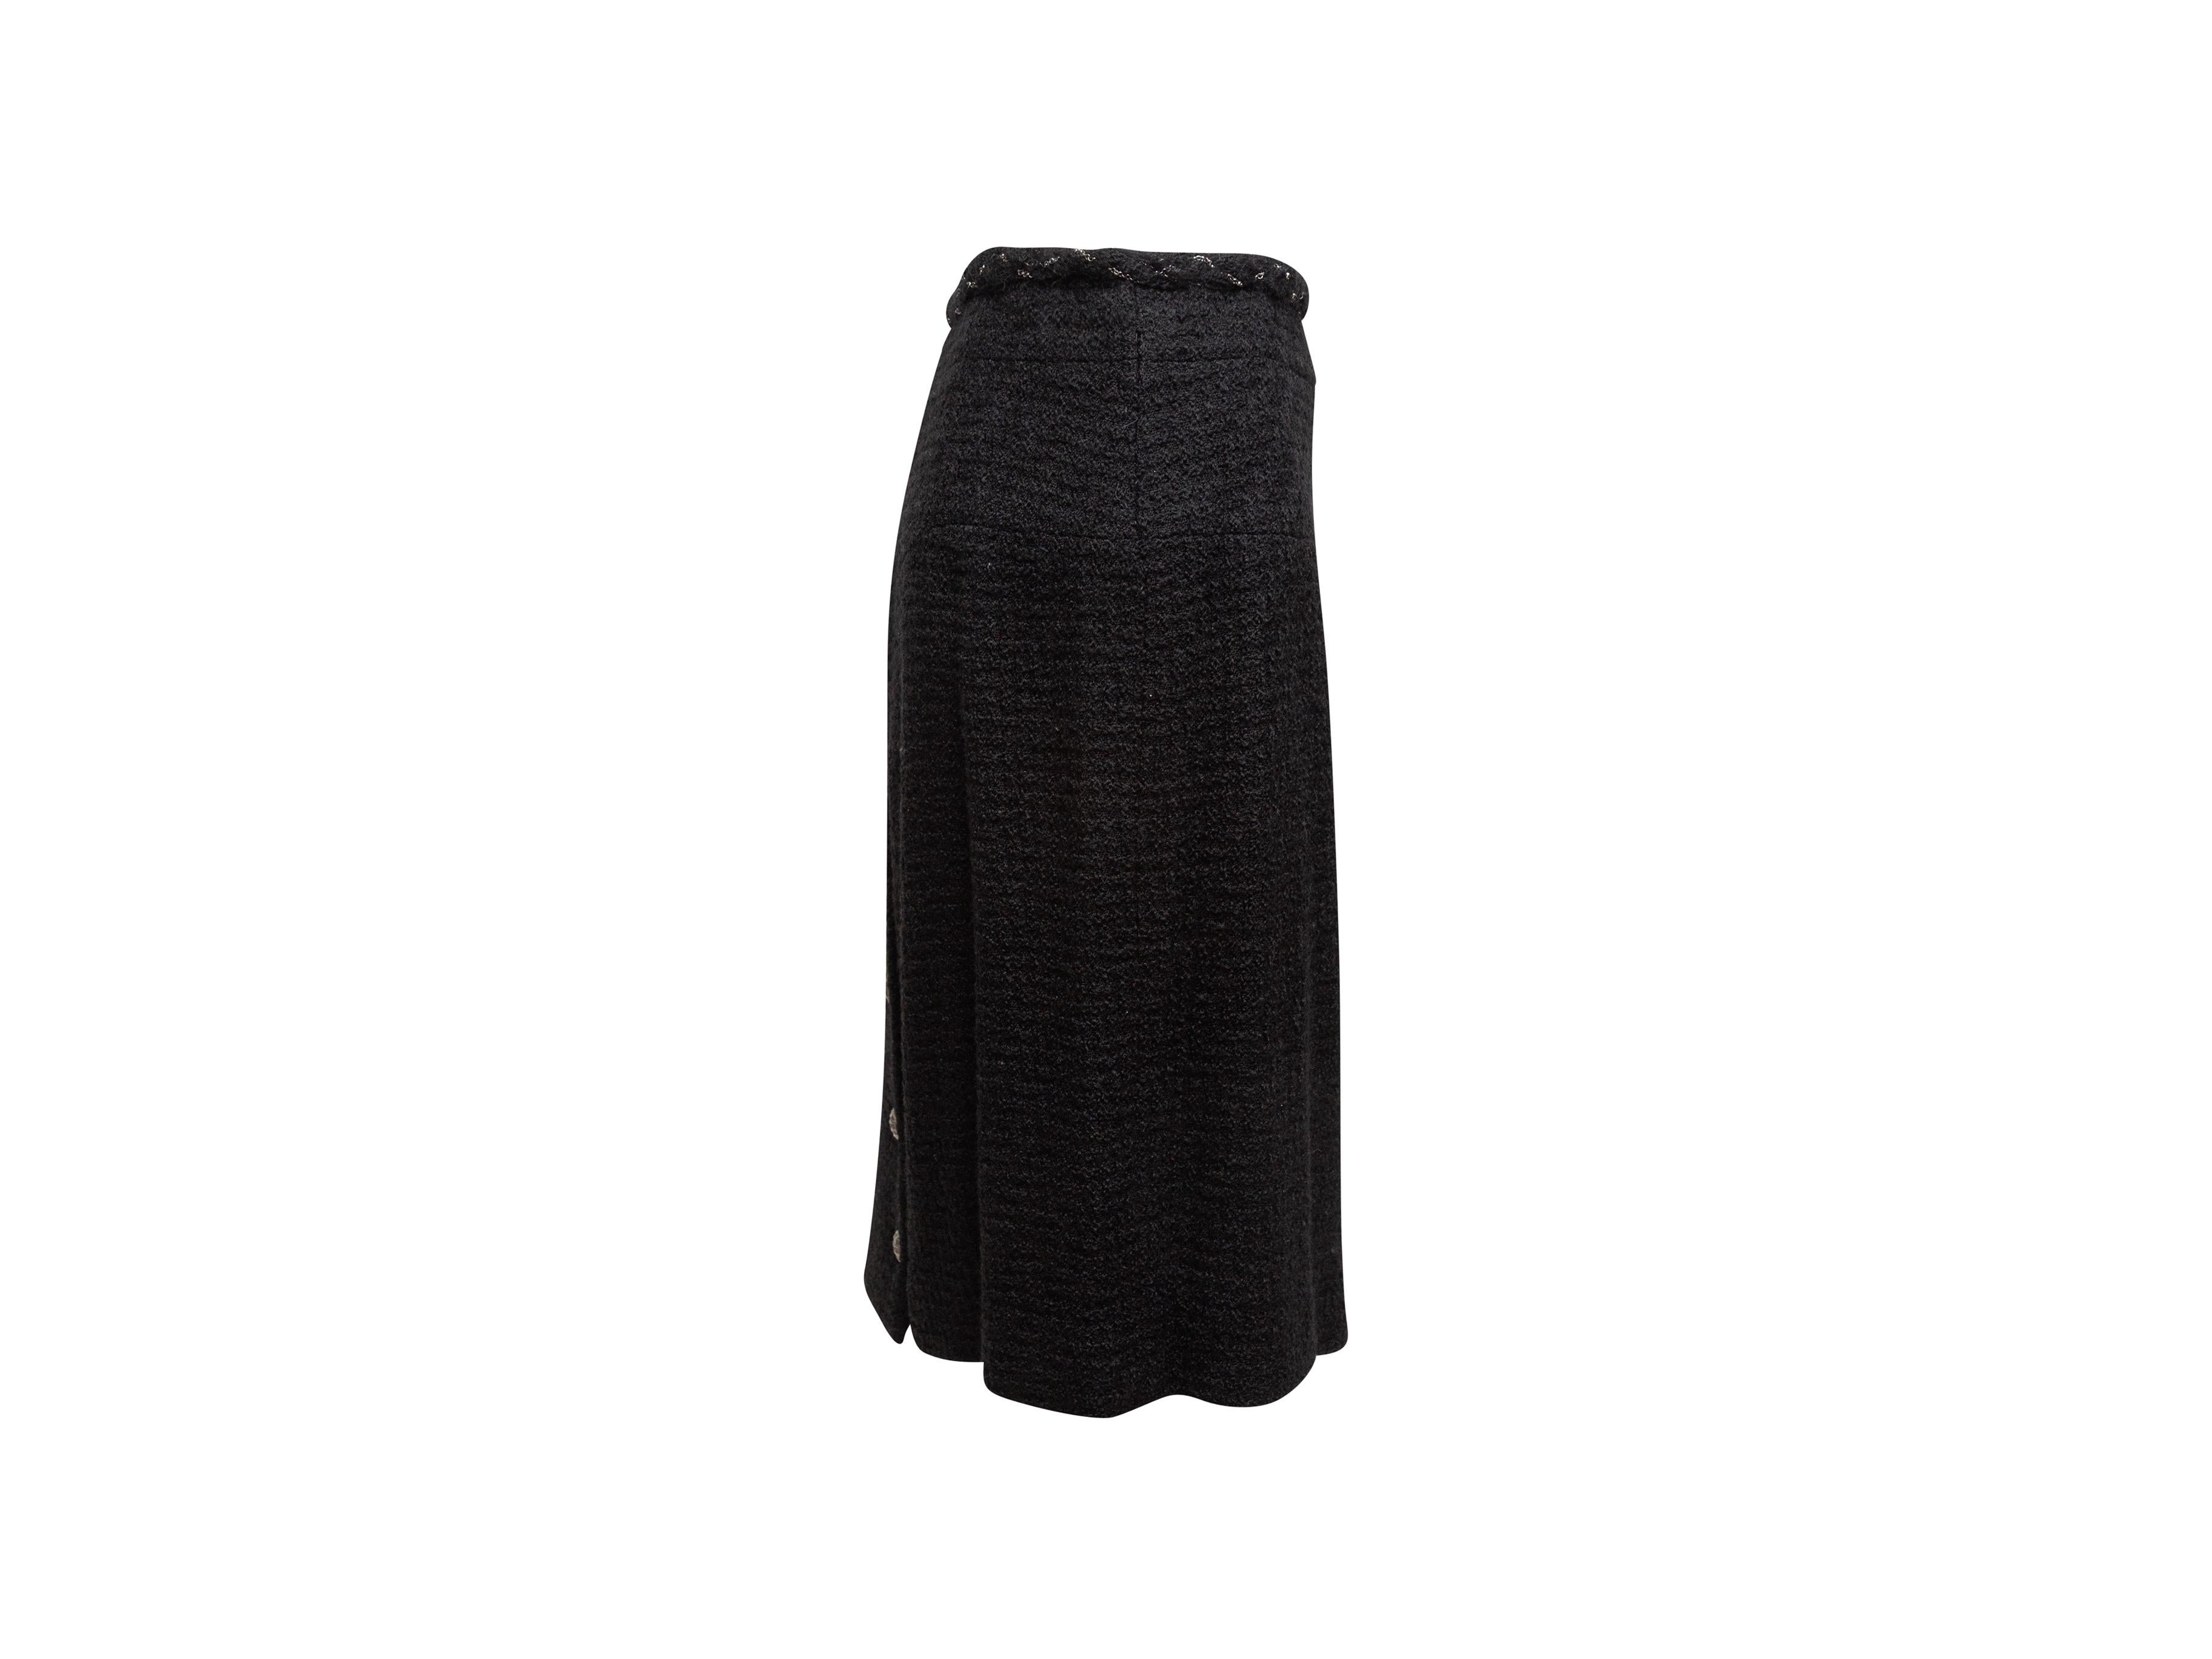 Product details: Black knee-length skirt by Chanel. Silver-tone chain-link accent detailing at waist. Silver-tone CC buttons at back vent. Zip closure at back. Designer size 50. 38